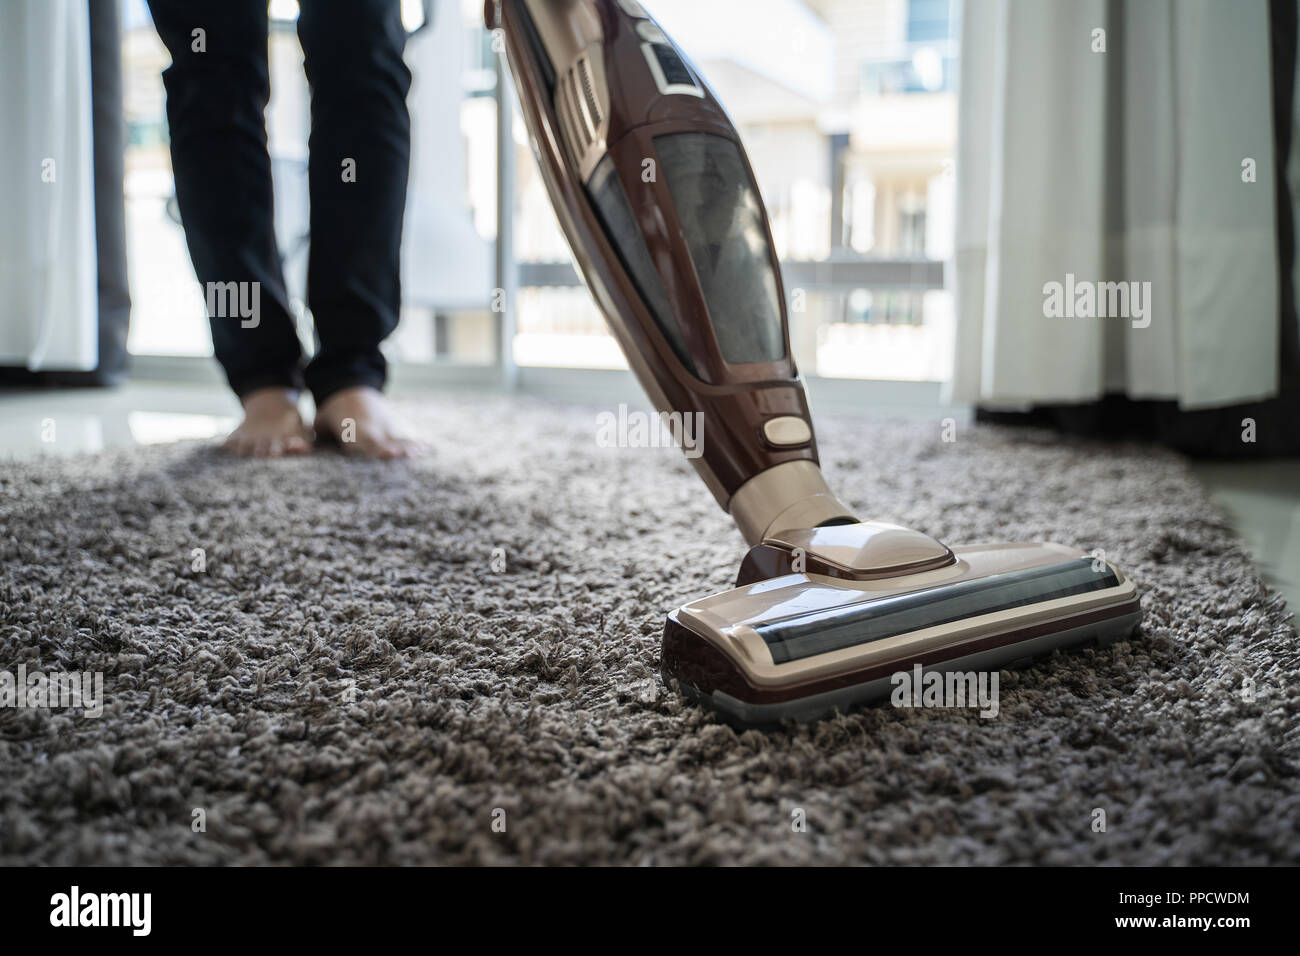 Close-up man using a vacuum cleaner while cleaning in the room Stock Photo  - Alamy